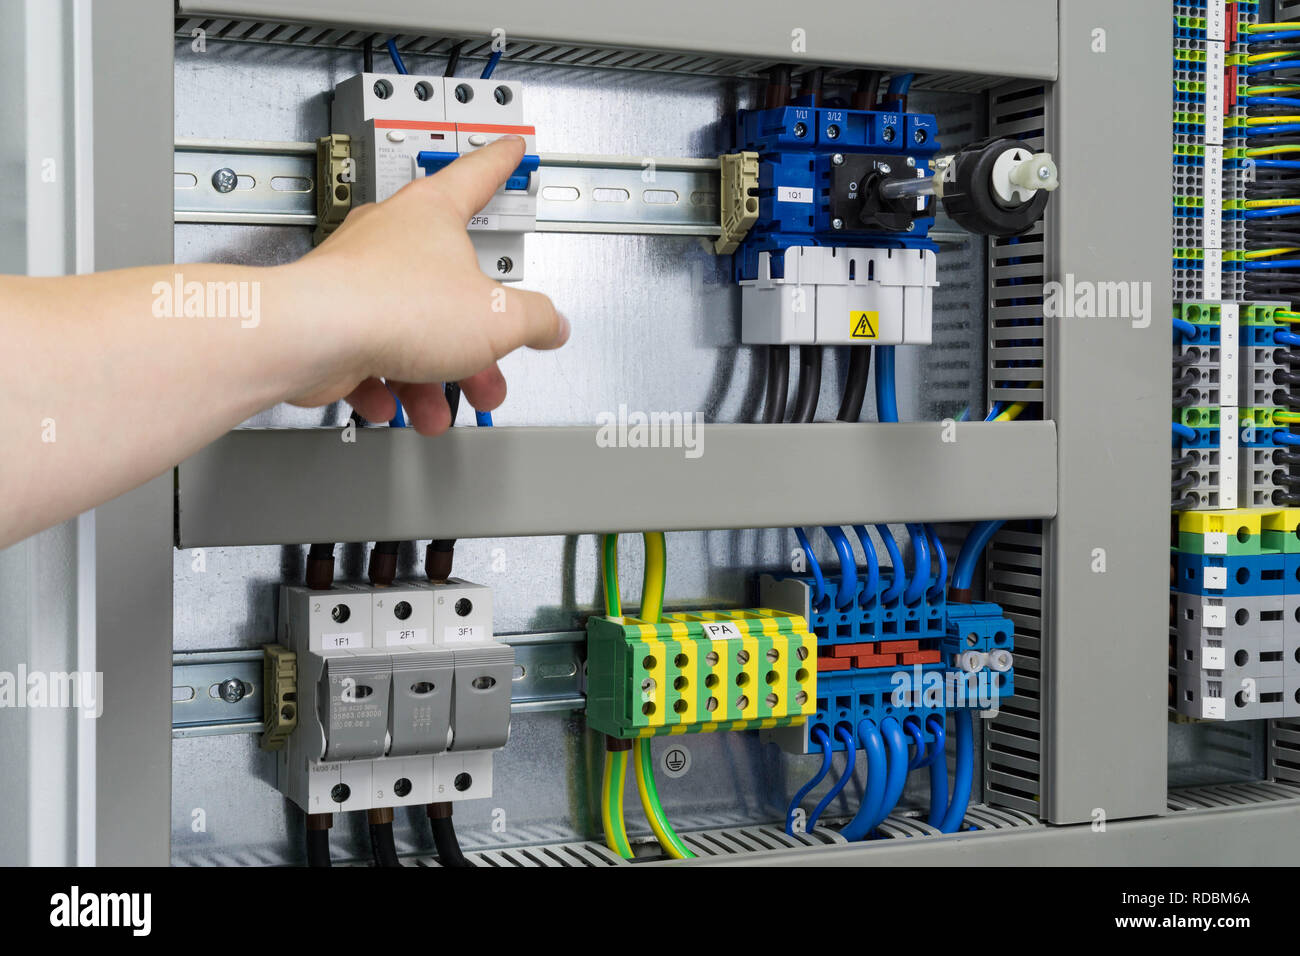 Electrical Cabinet High Resolution Stock Photography and Images - Alamy